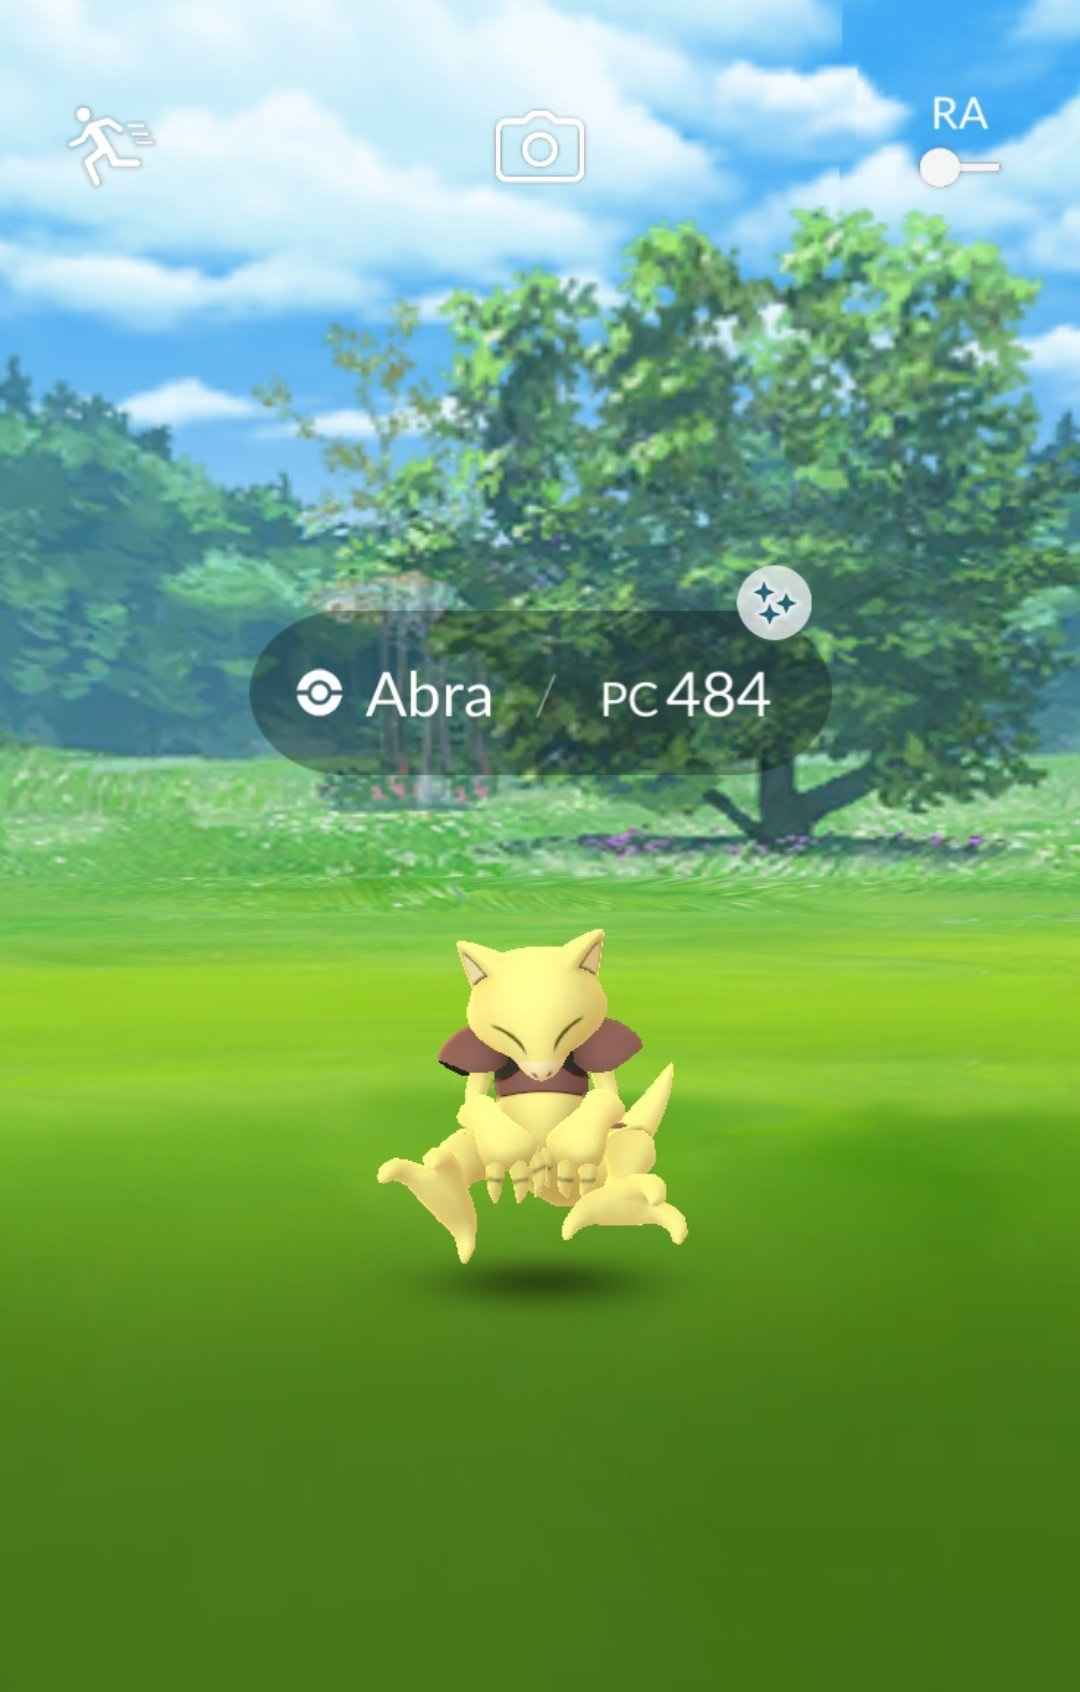 Pokémon GO's April Community Day Features Abra and Counter